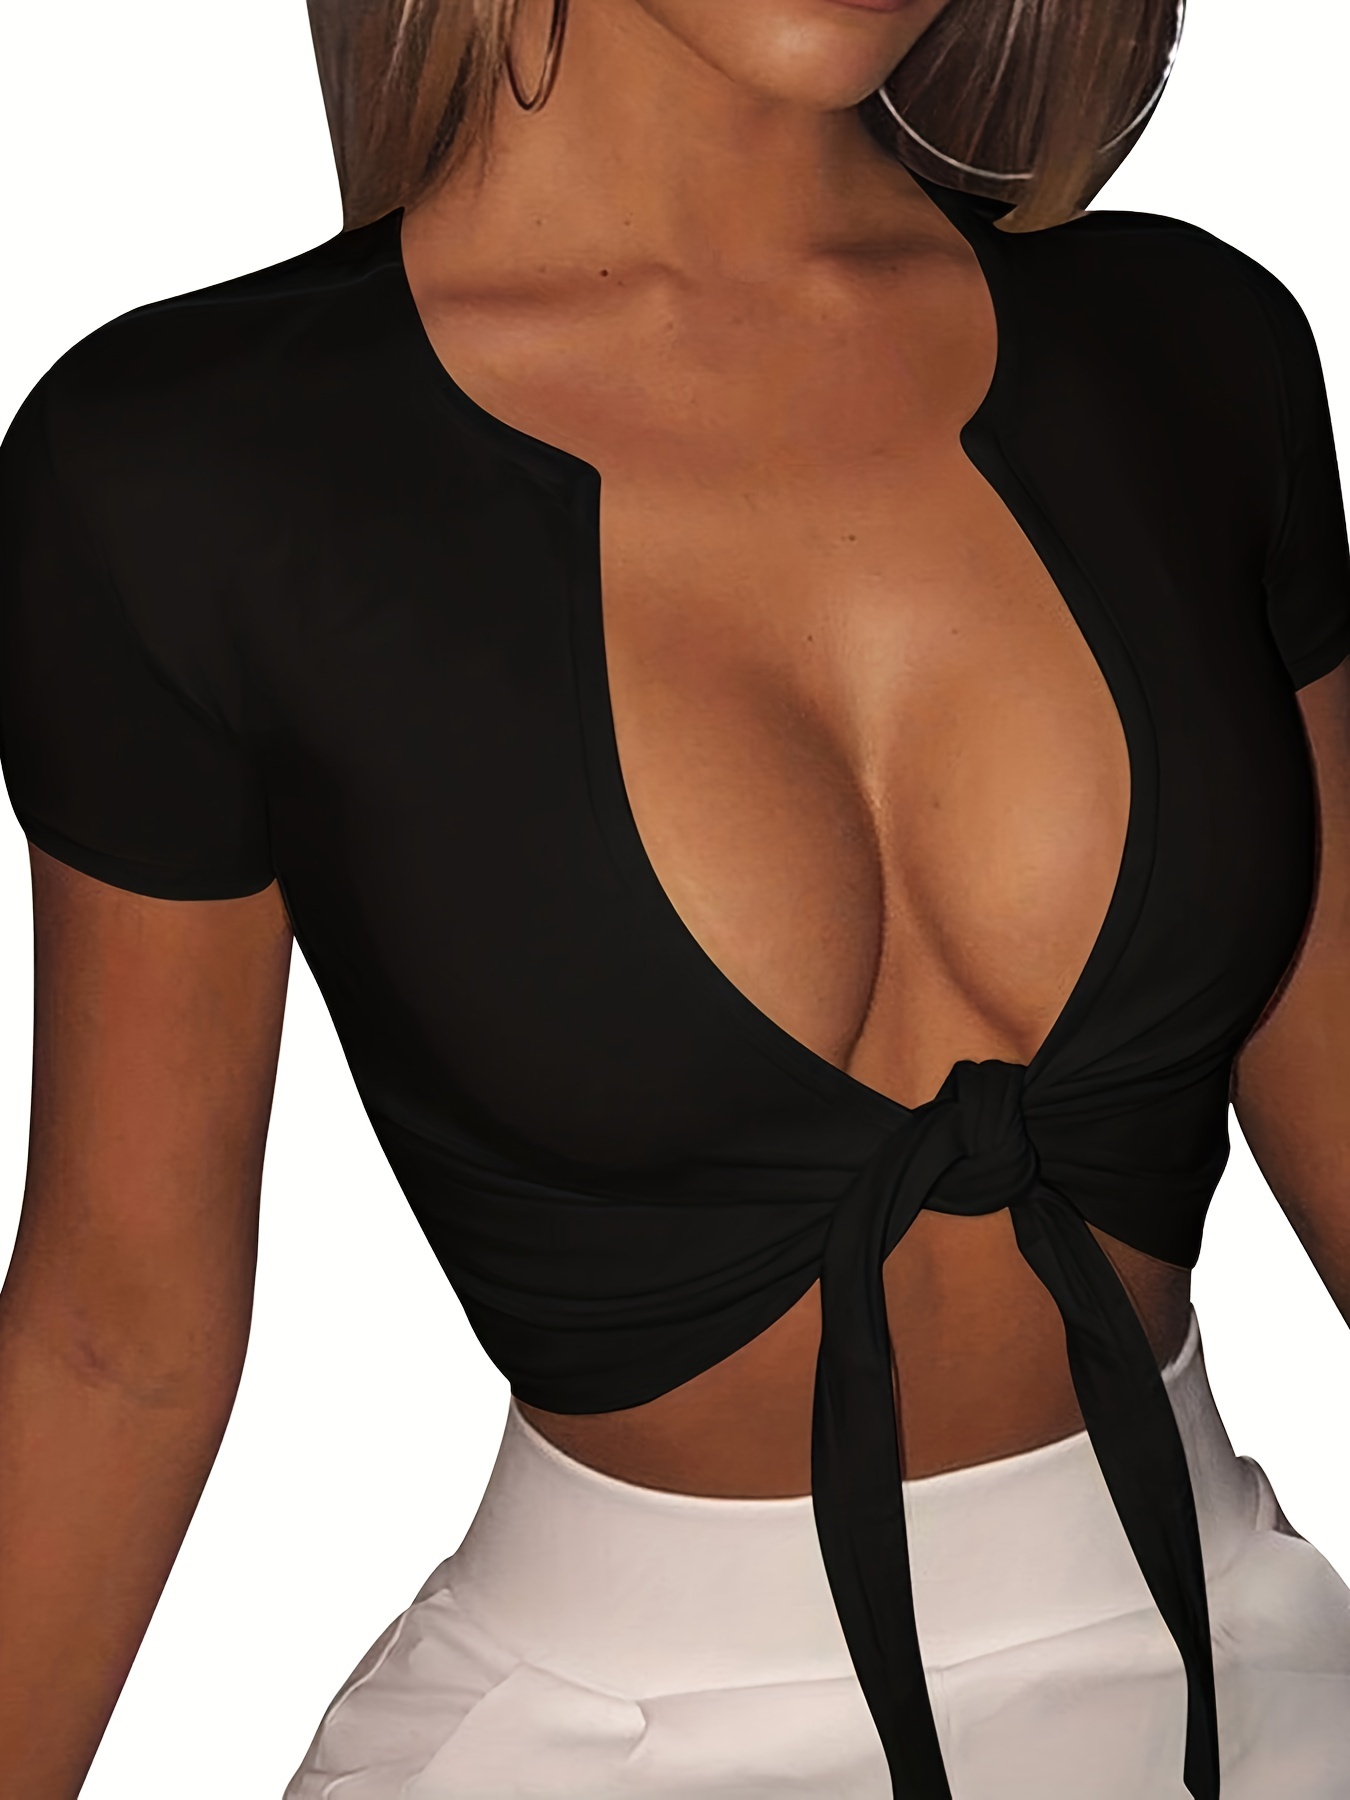 Women's Tops Sexy Tops for Women Shirts Plunging Neck Knot Front